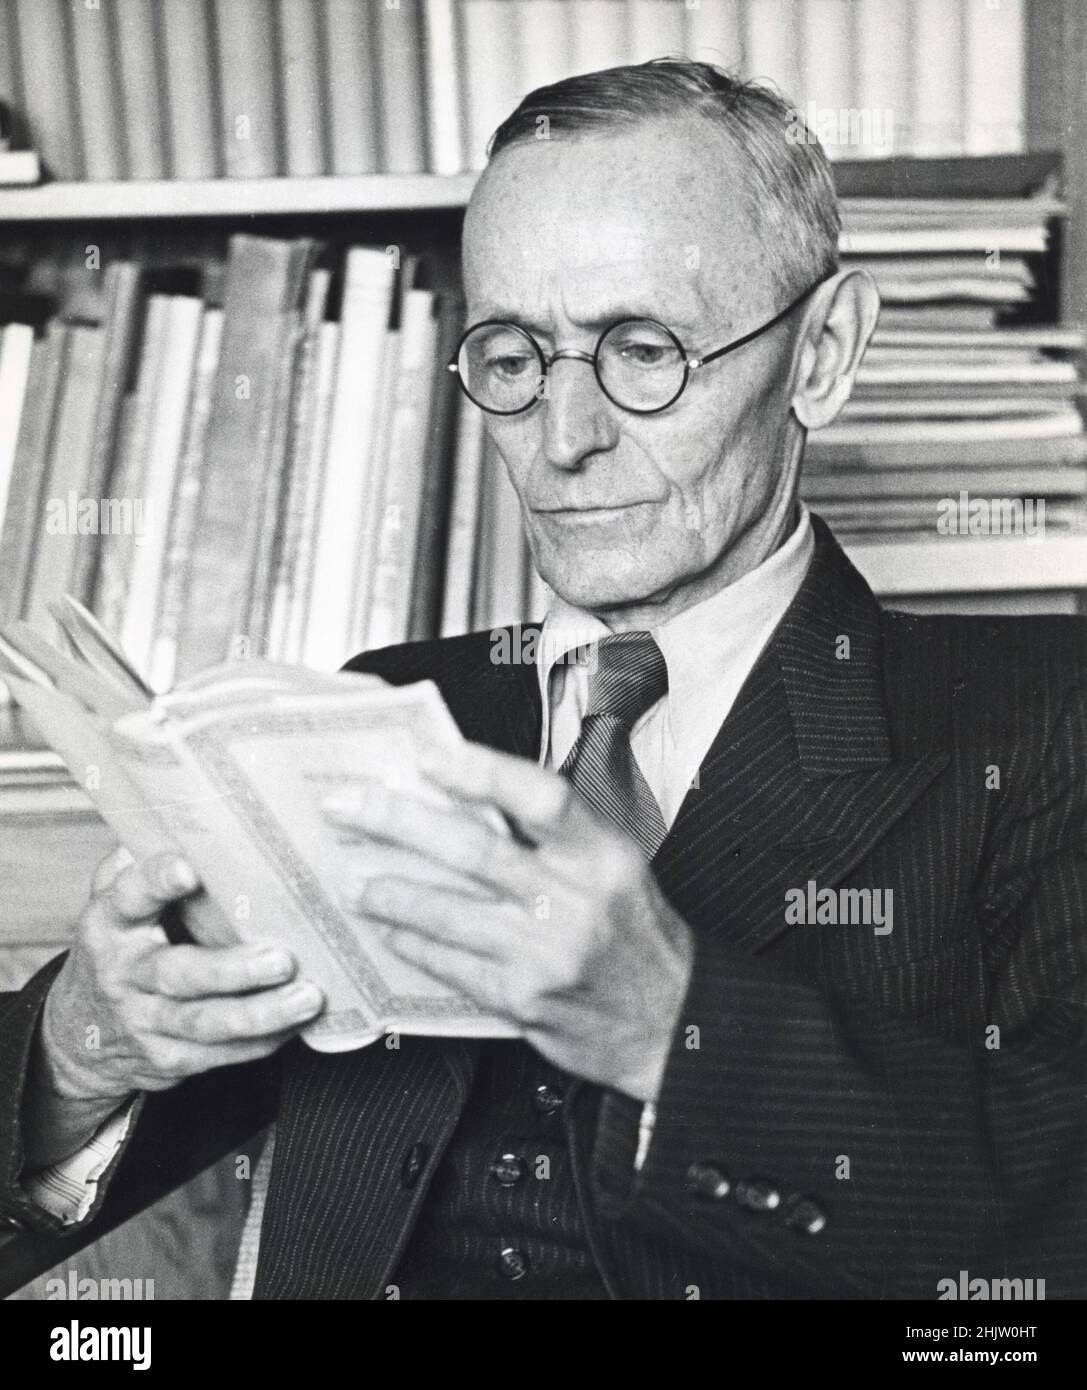 A portrait of the German author Hermann Hesse Stock Photo